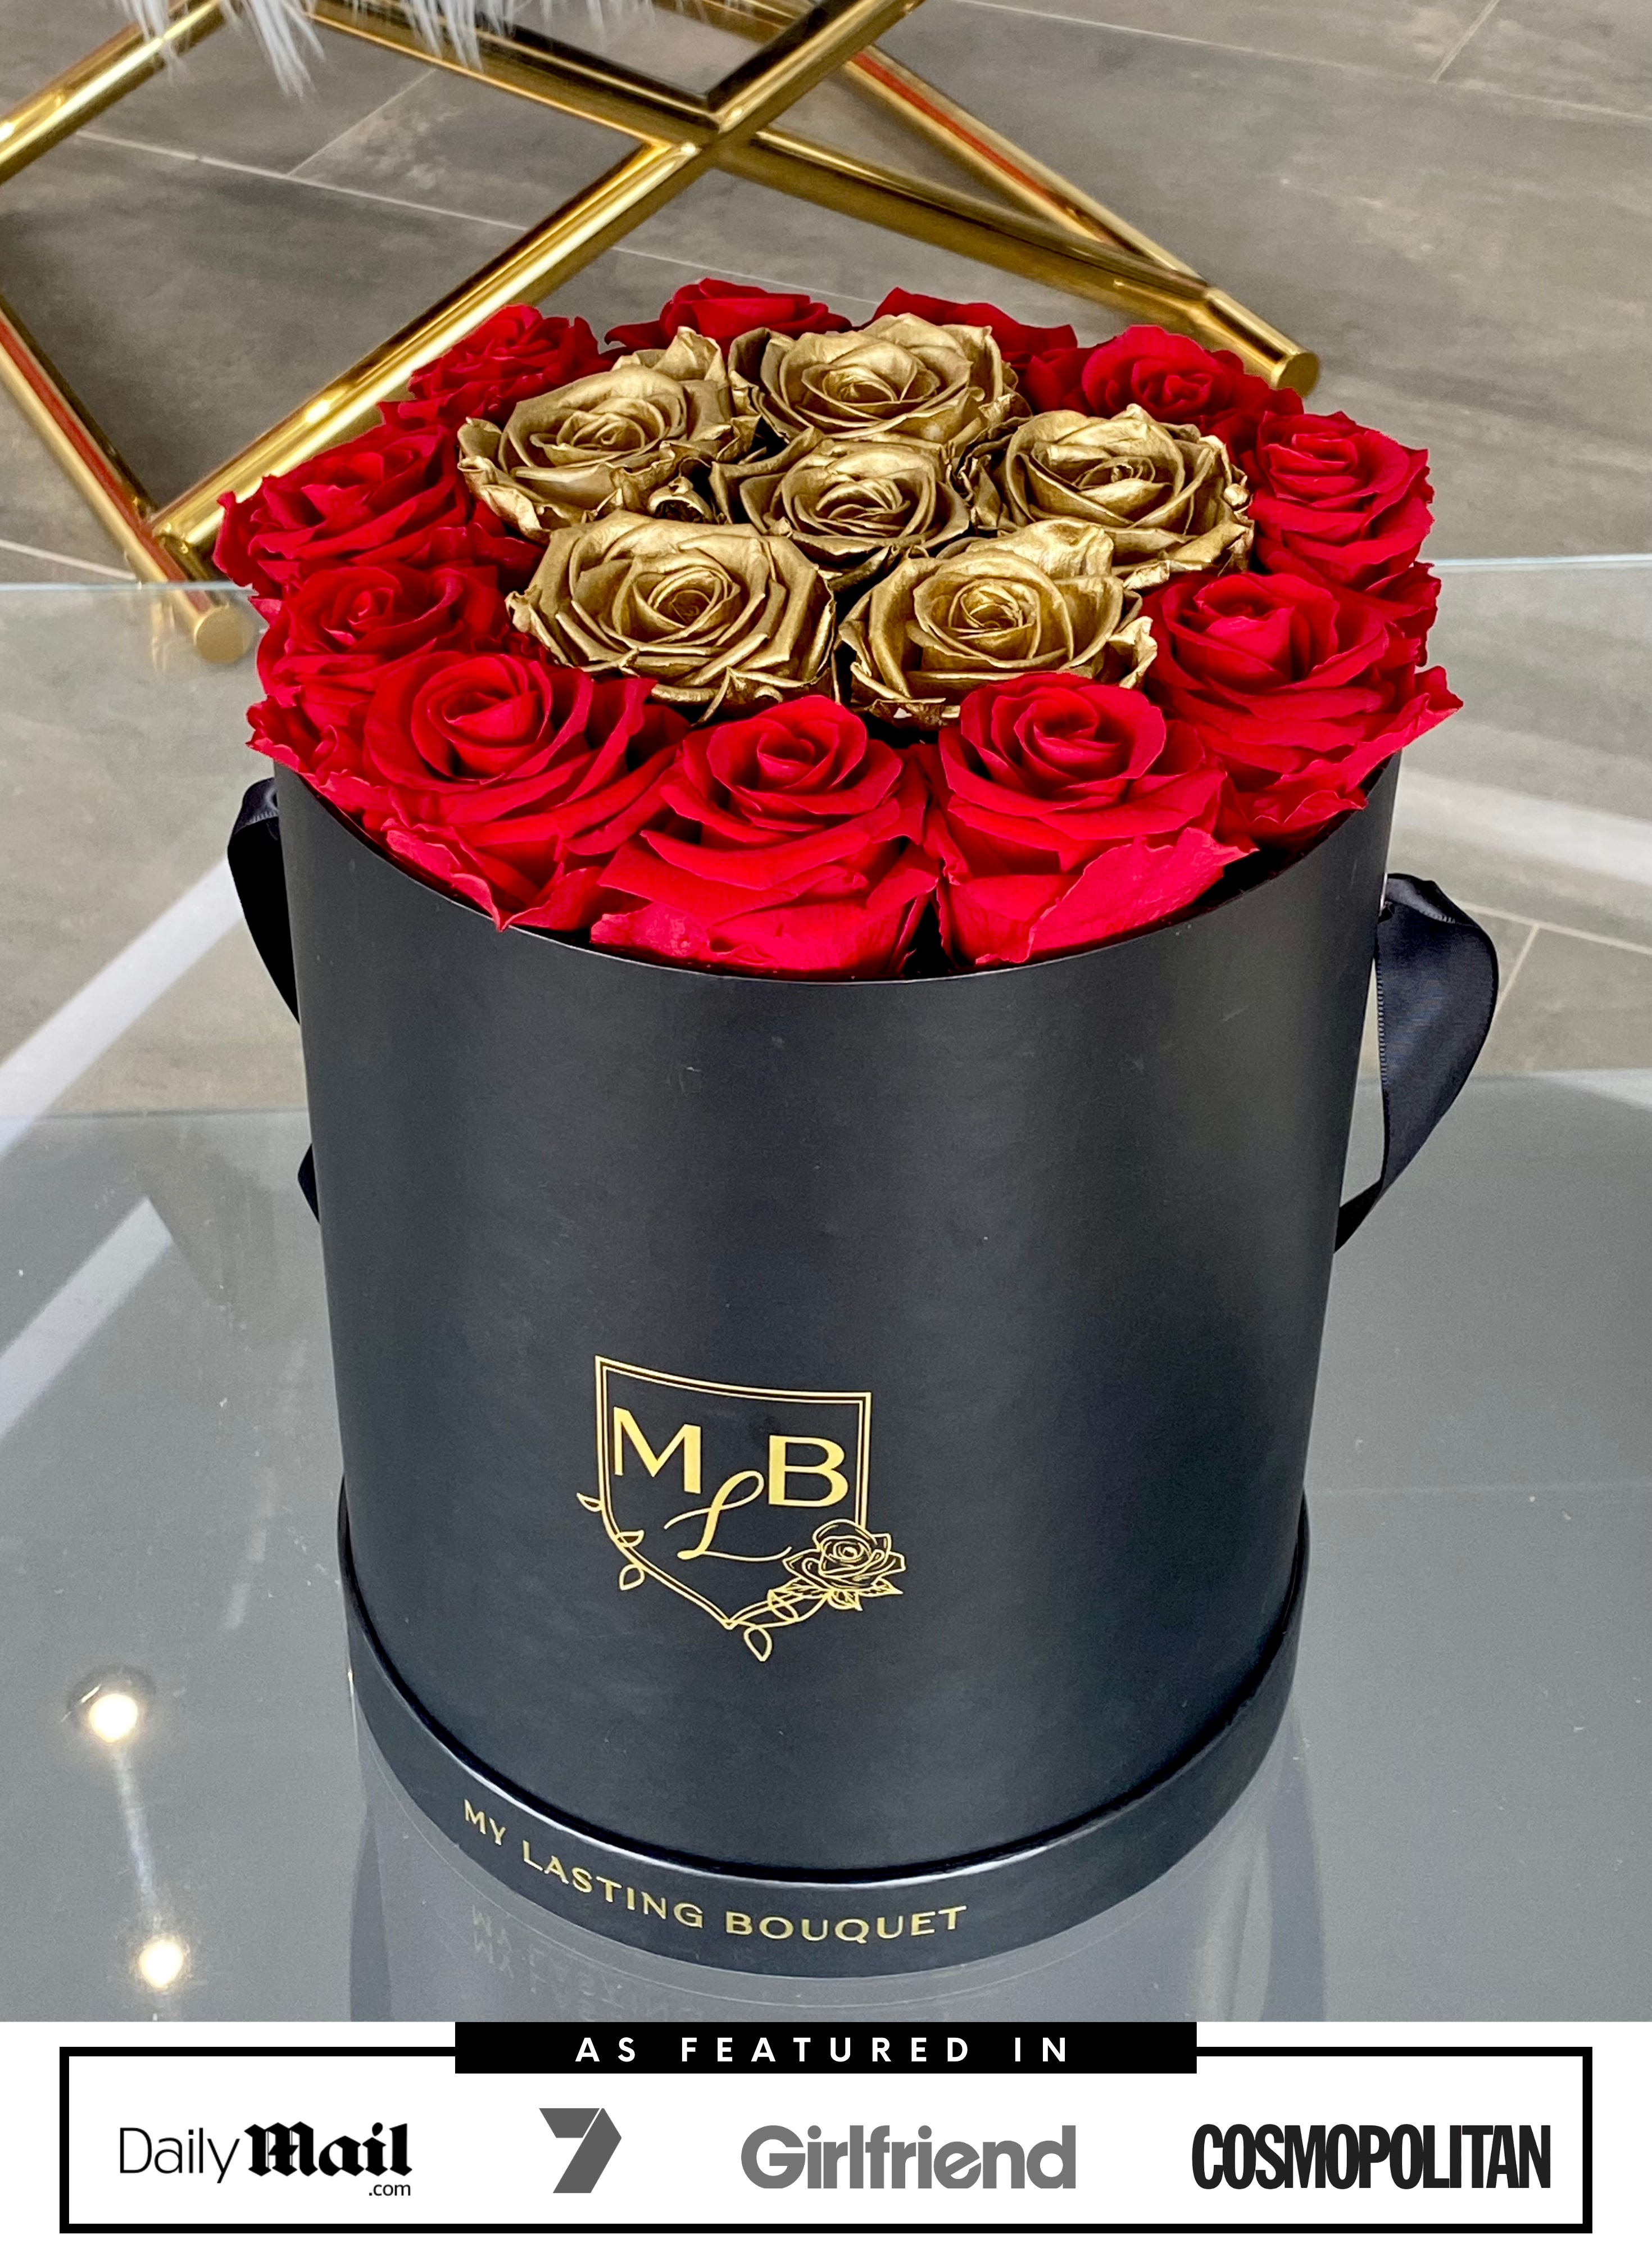 Round Rose Box- Red & Gold - My Lasting Bouquet